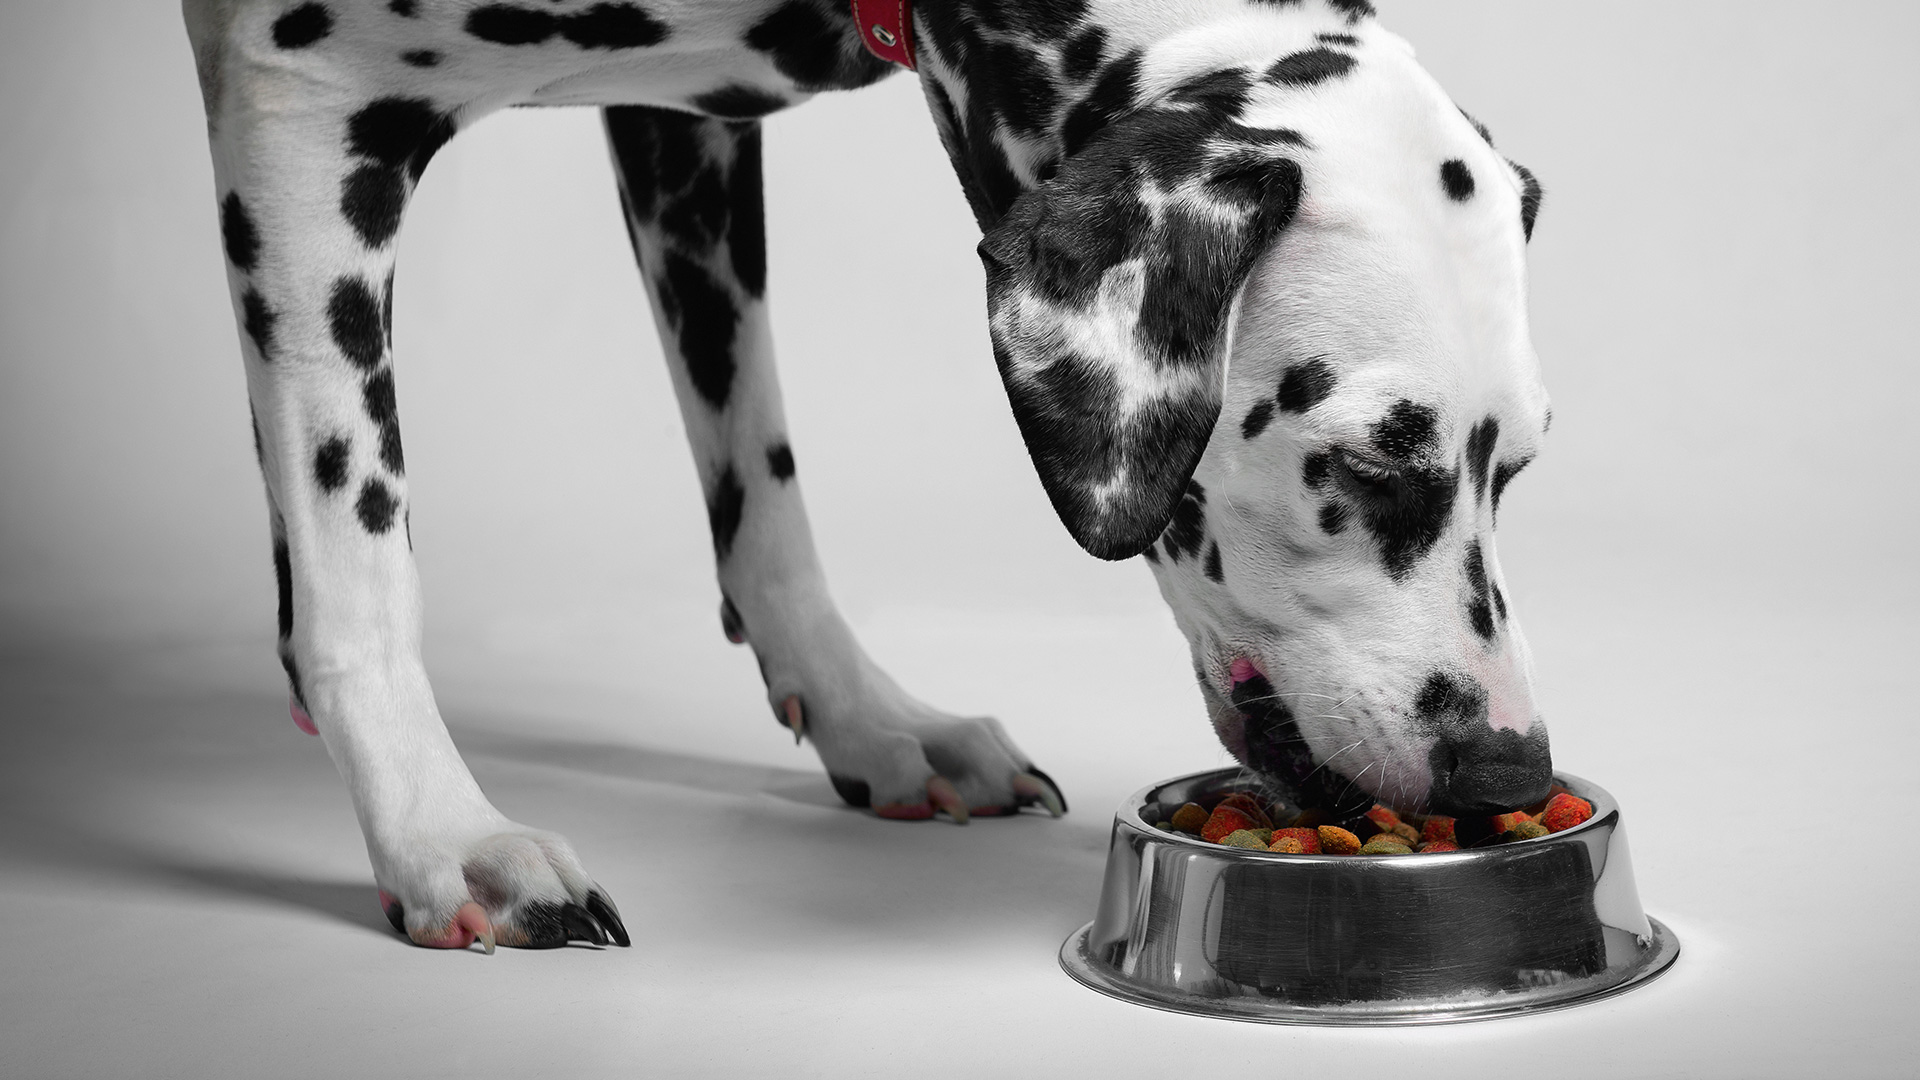 Category 3 Animal Fat - an important Pet Food Ingredient